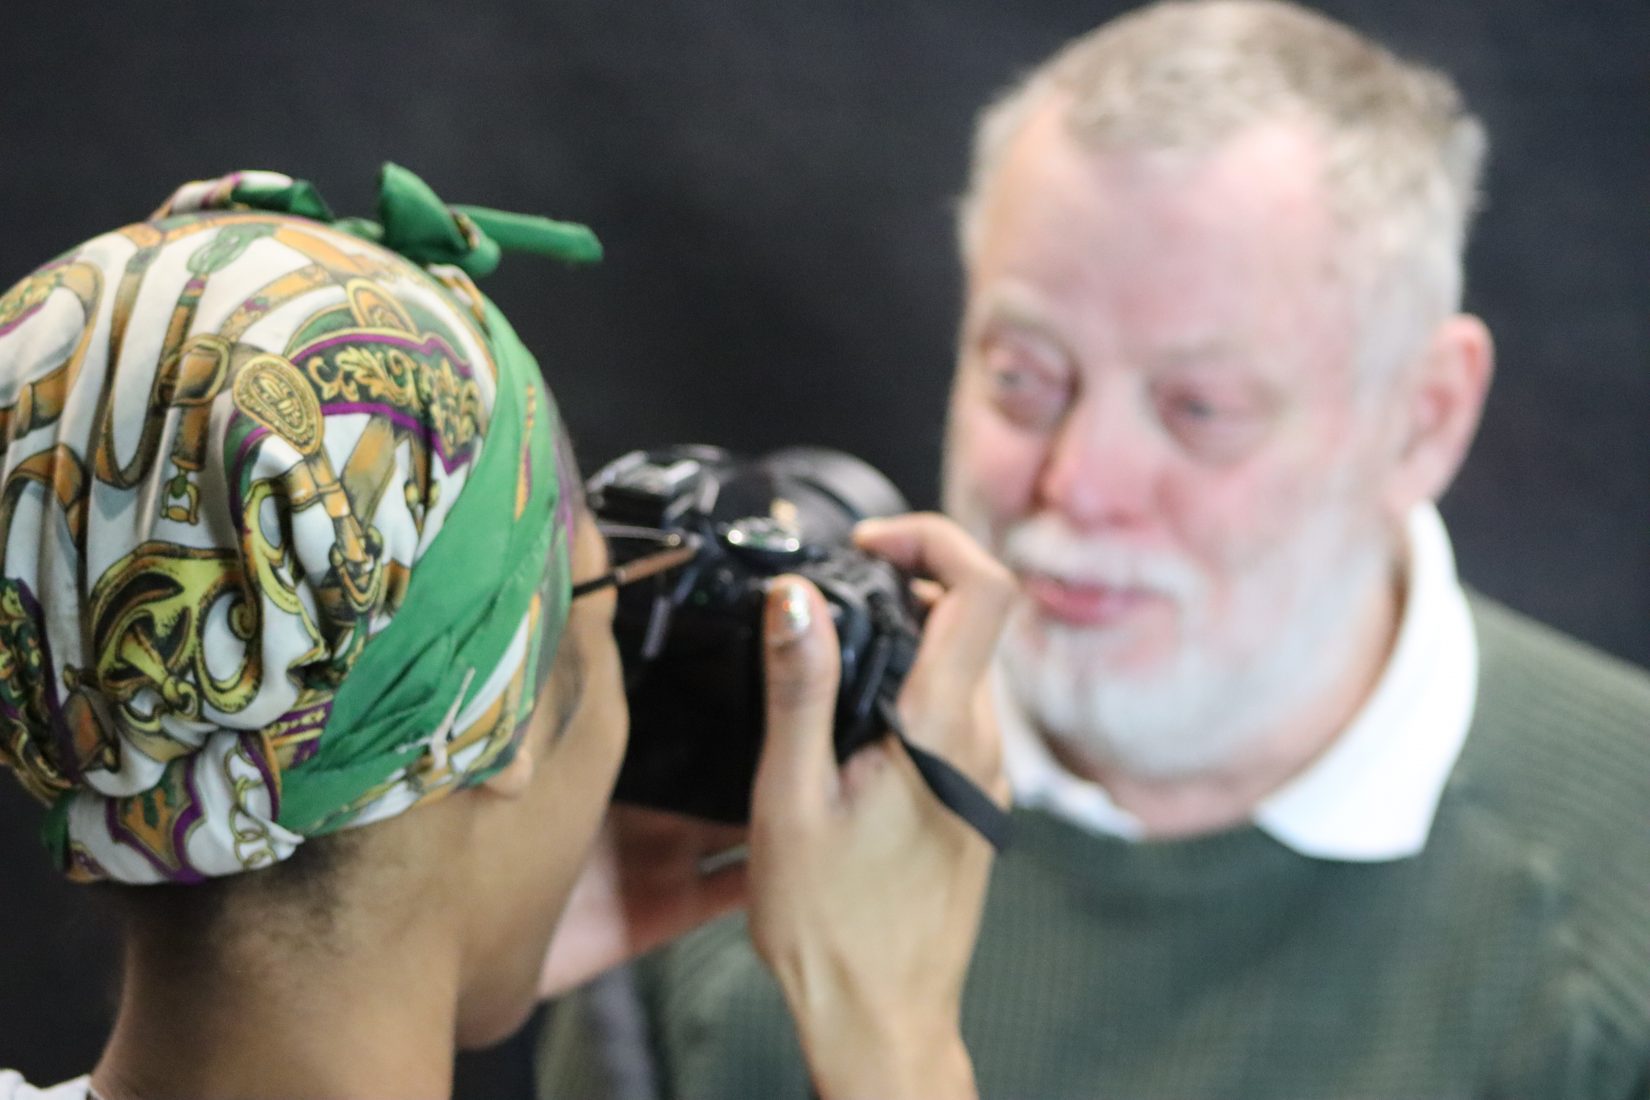 Woman in foreground with a colourful headscarf photographs a man with a grey hair and beard in front of a dark studio backdrop.